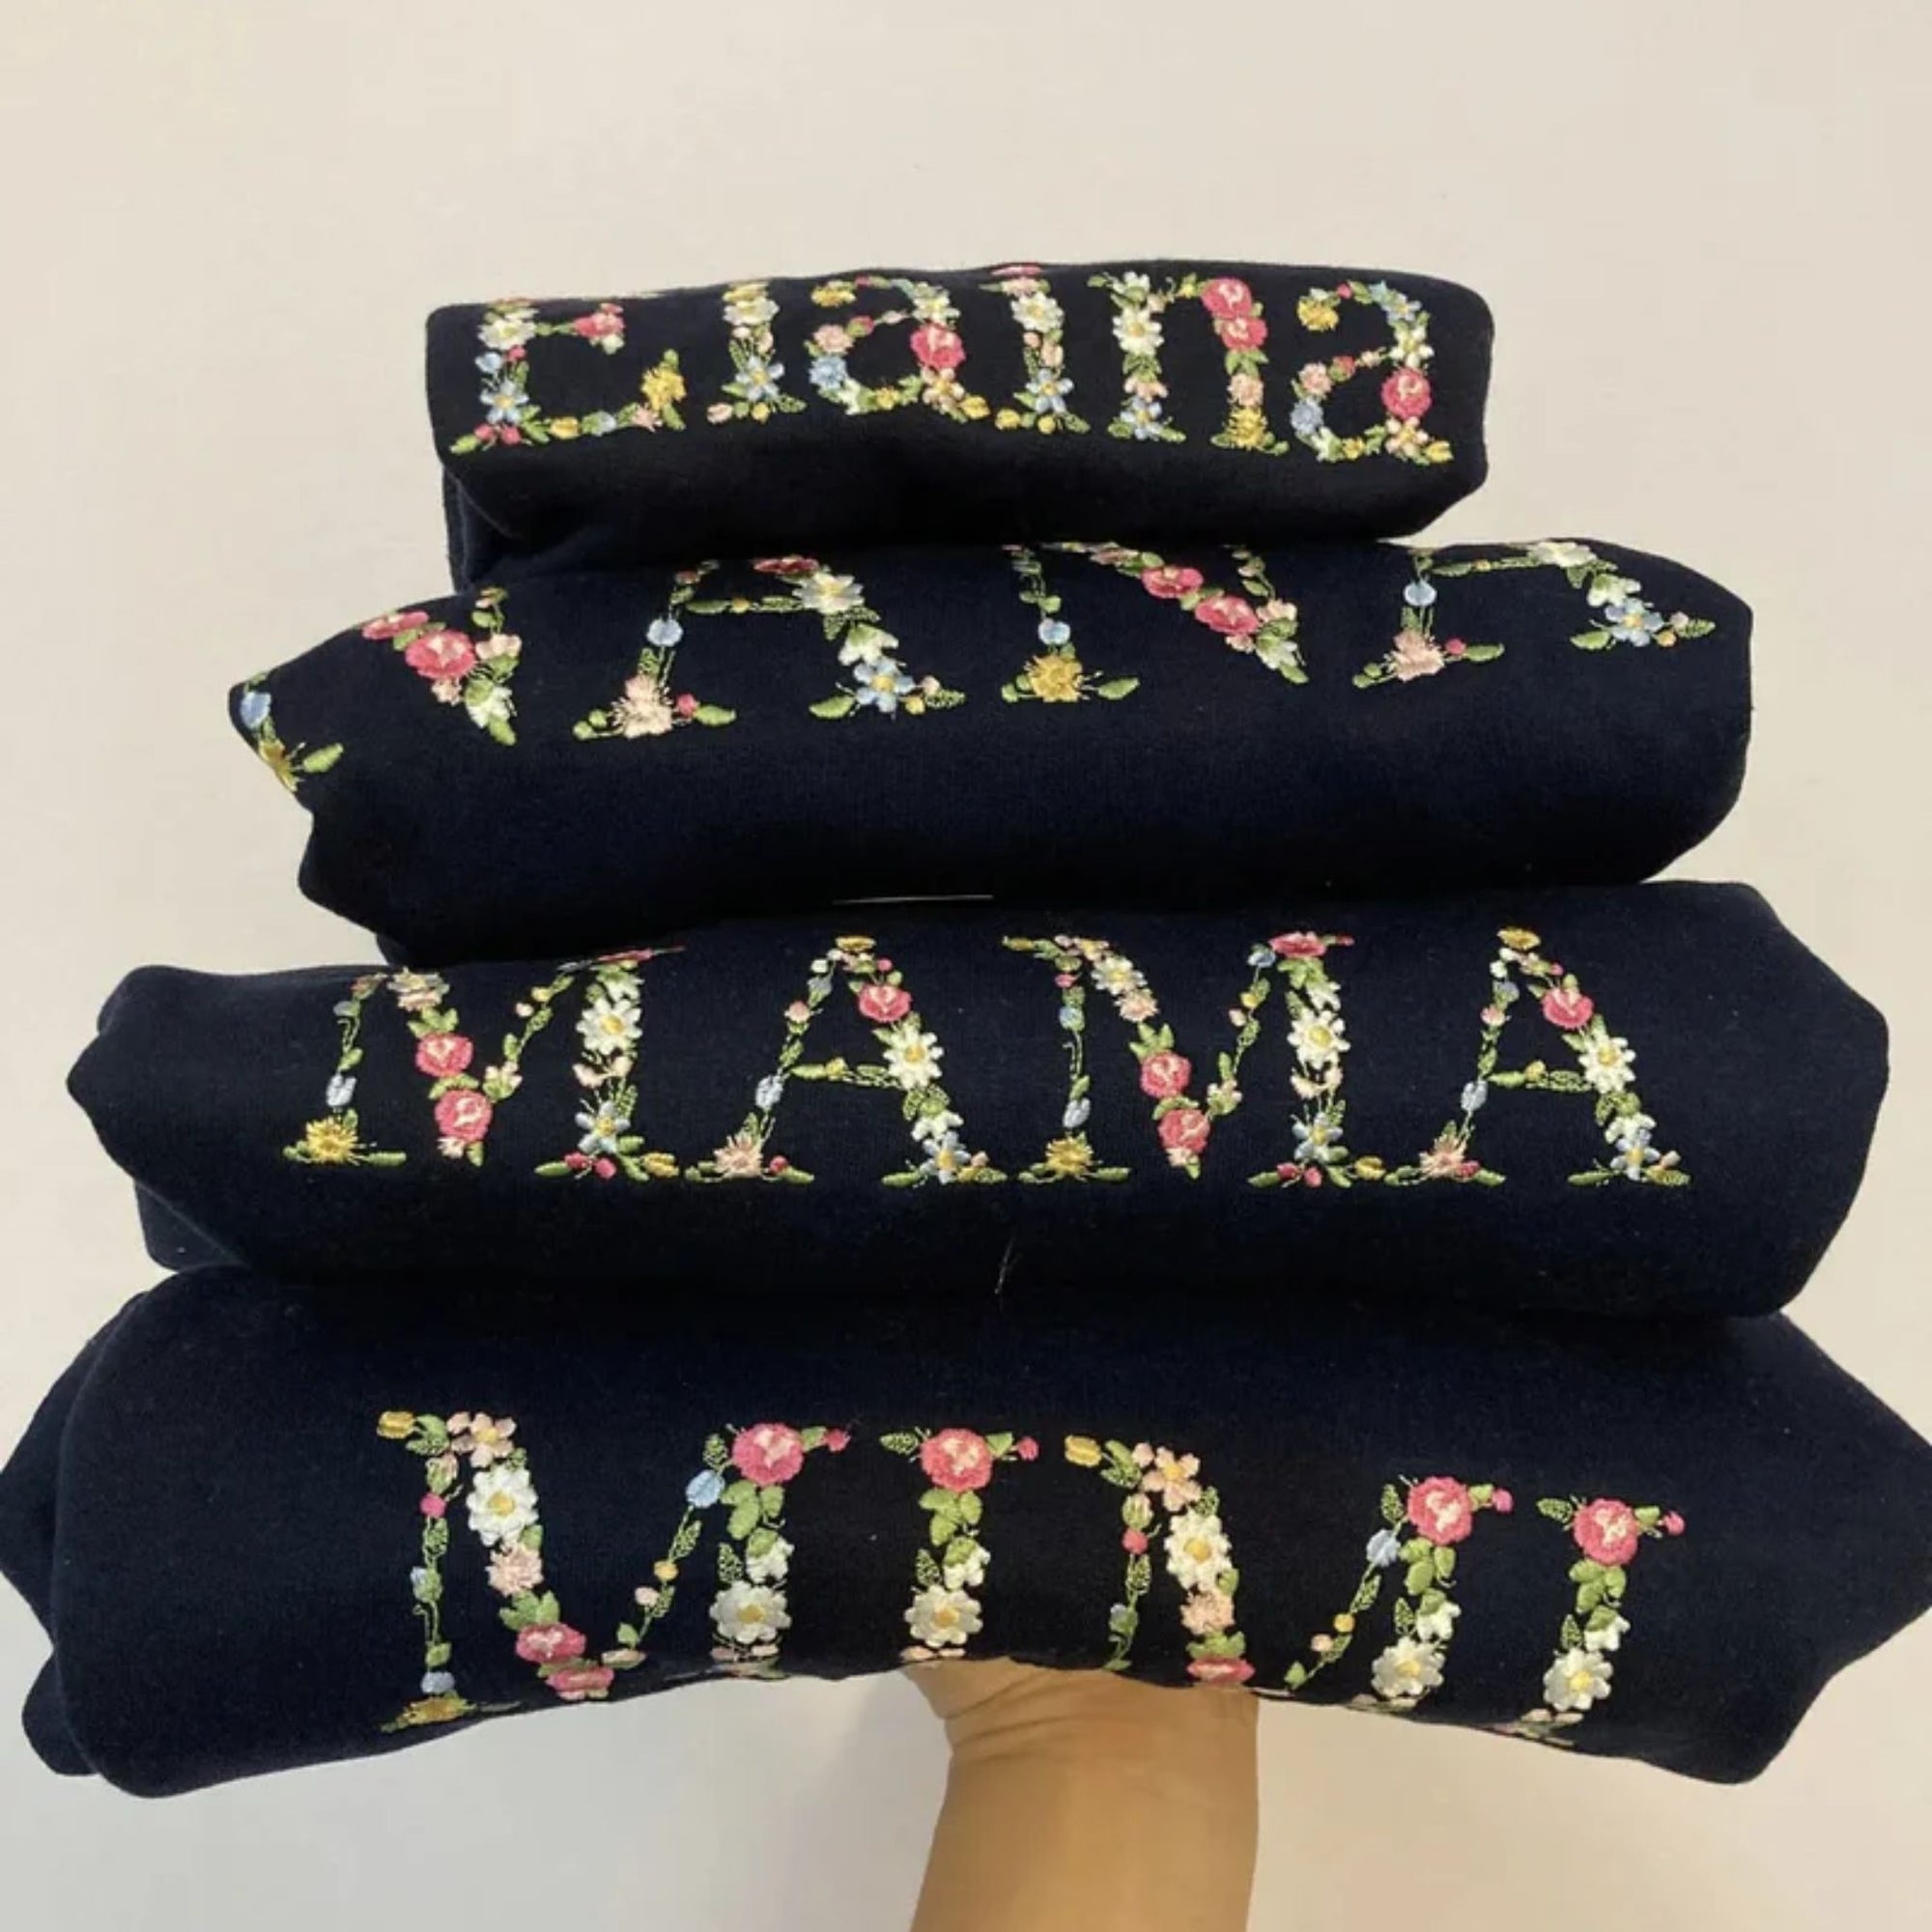 Personalized Mama Sweatshirt, Embroidery Crewneck with Name Flower Letter, Unique Gifts for New Moms